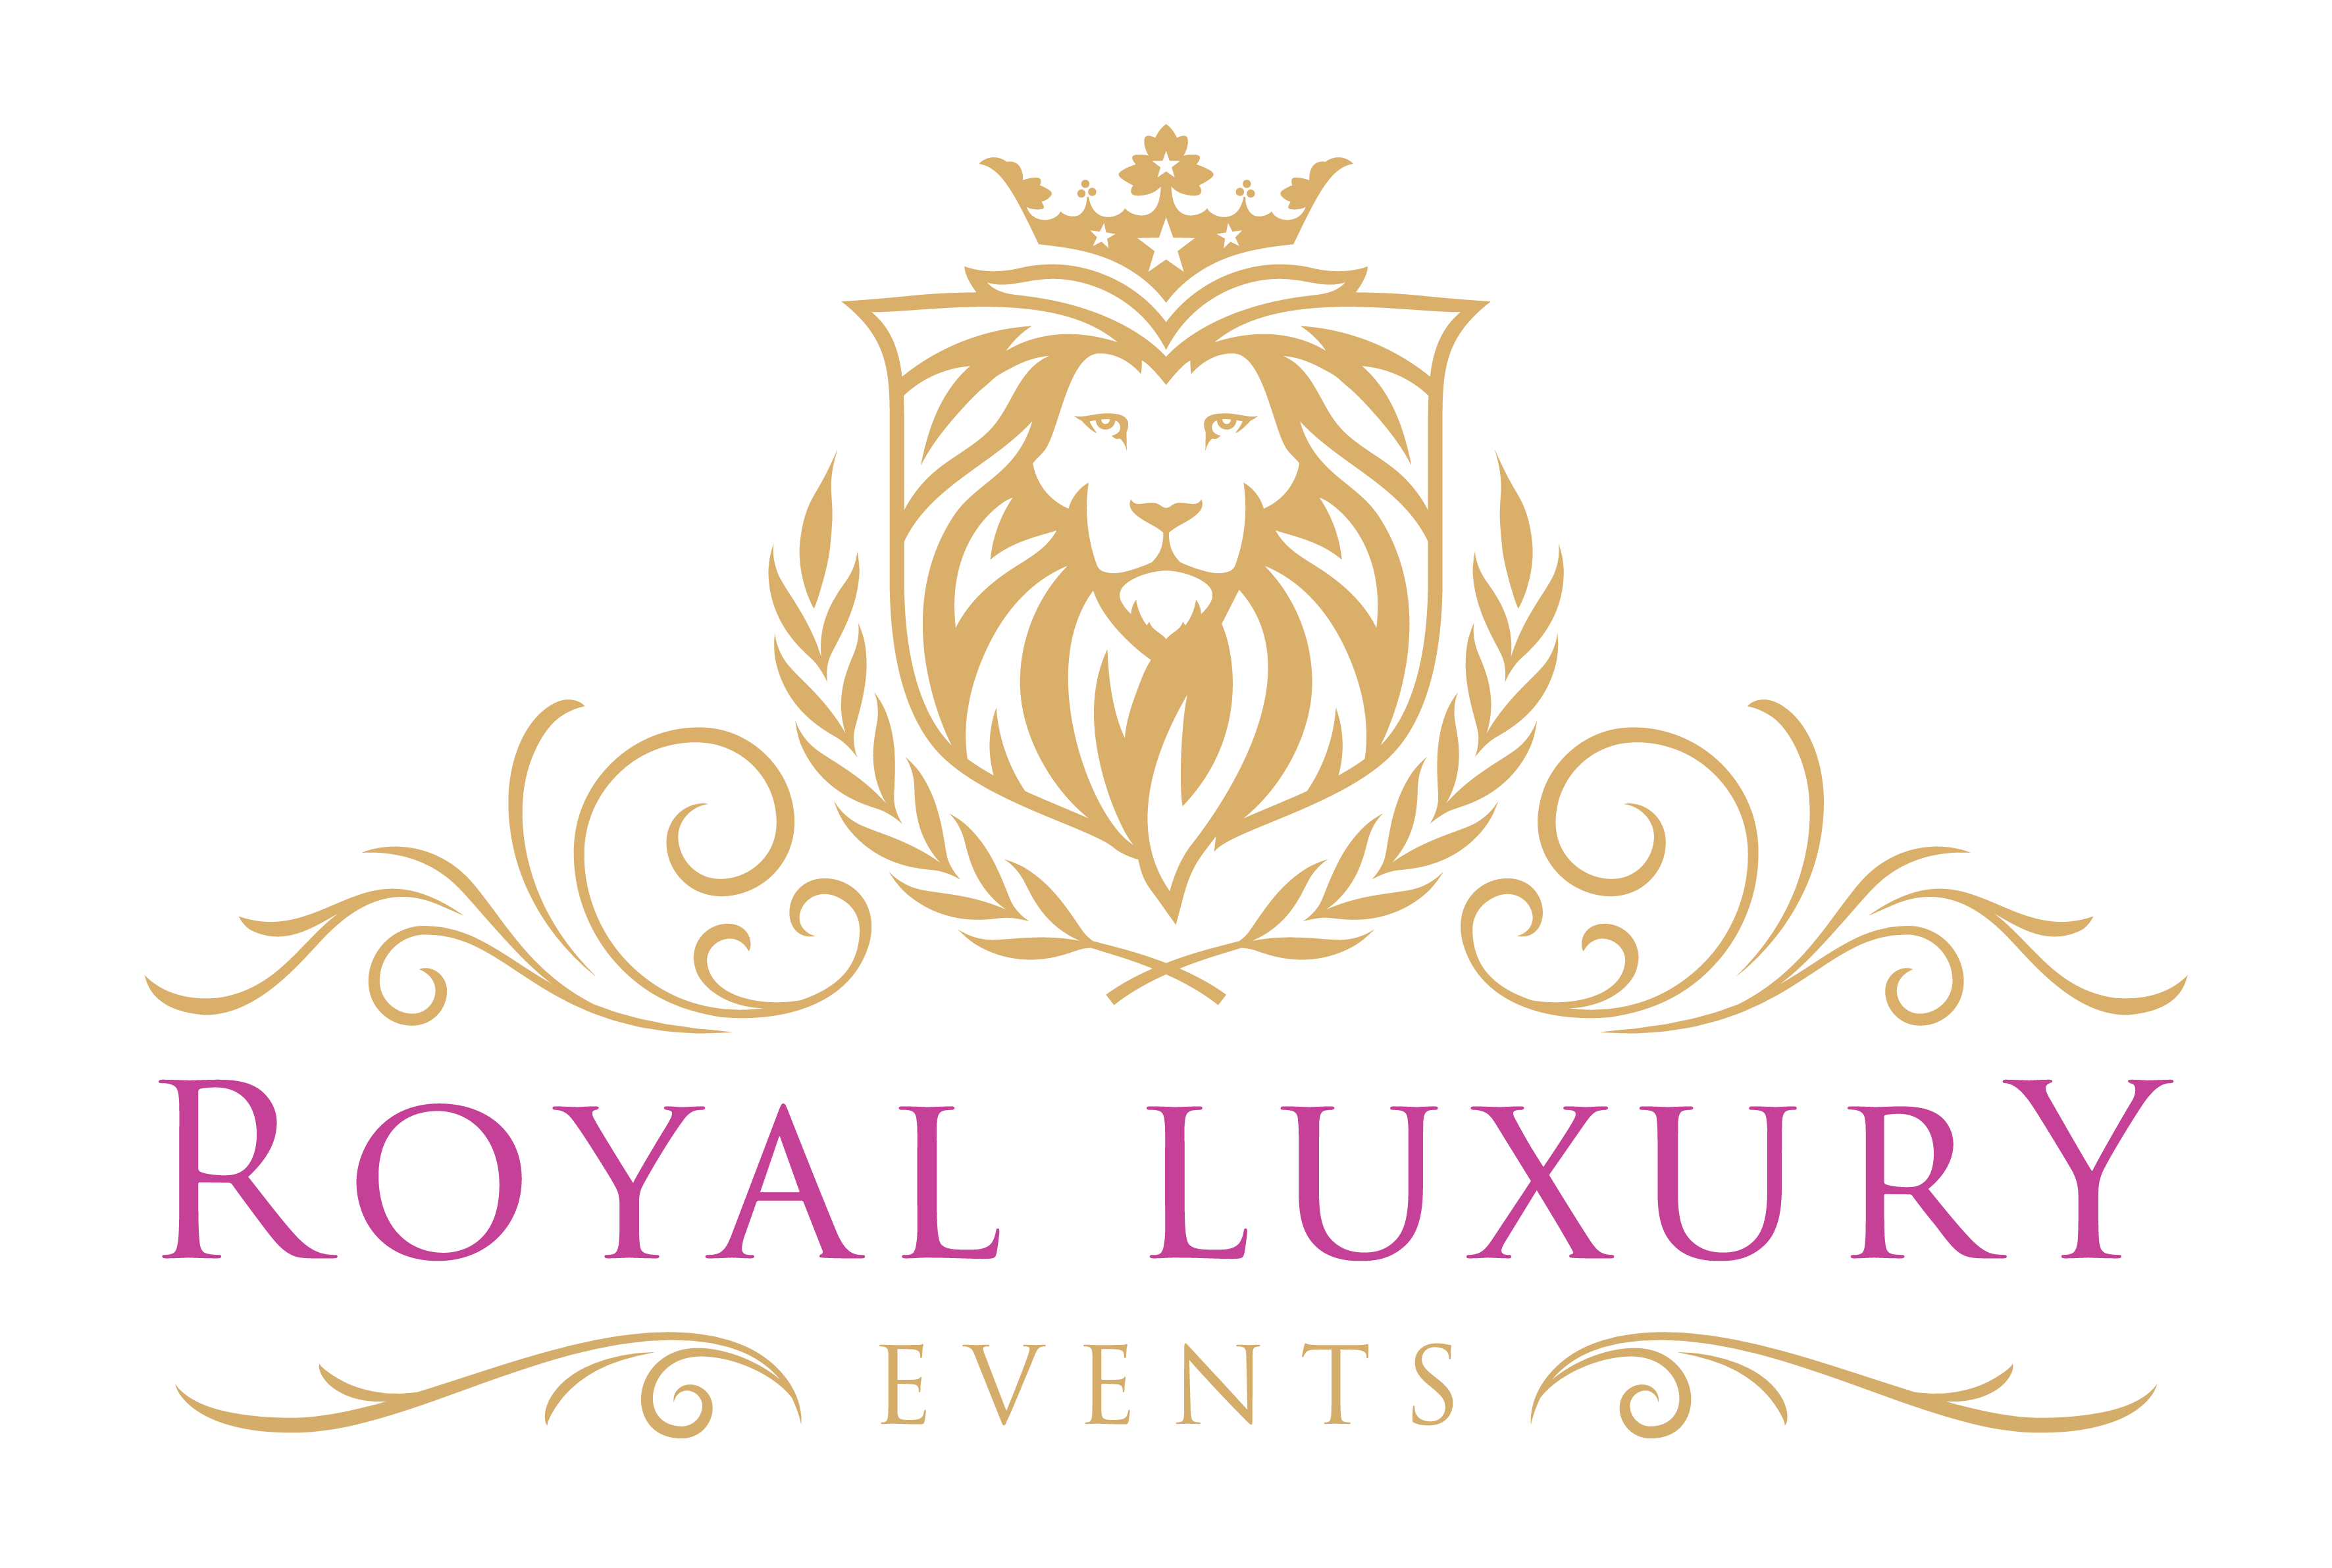 royal luxury, weddings, events, flowers, decor, rentals, chairs